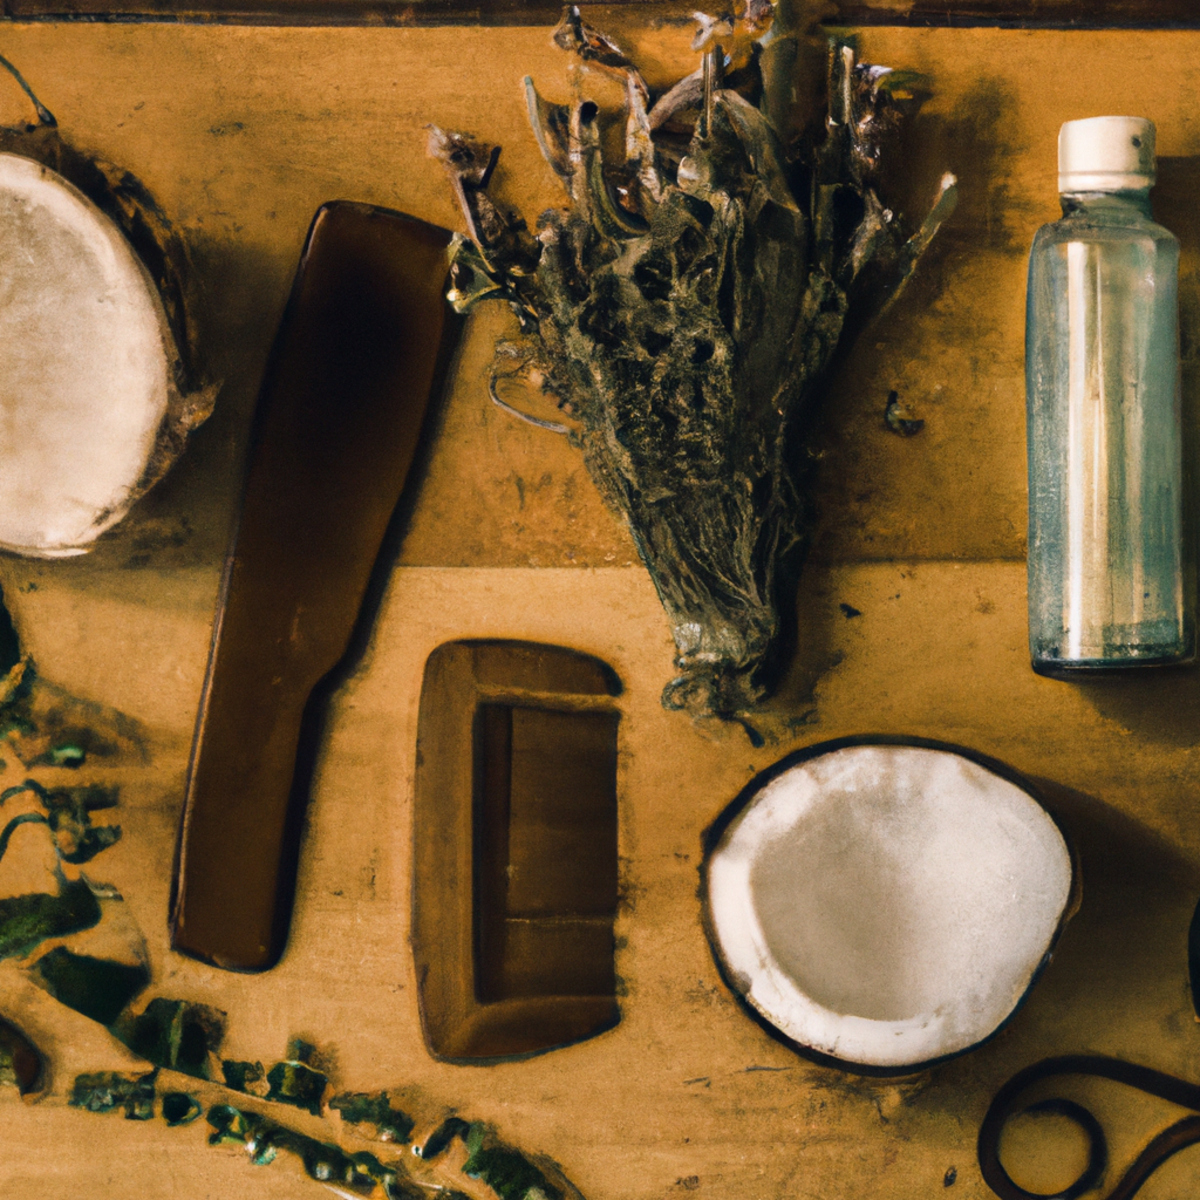 DIY hair care essentials on a wooden table, including coconut oil, lavender, a wooden comb, and argan oil.